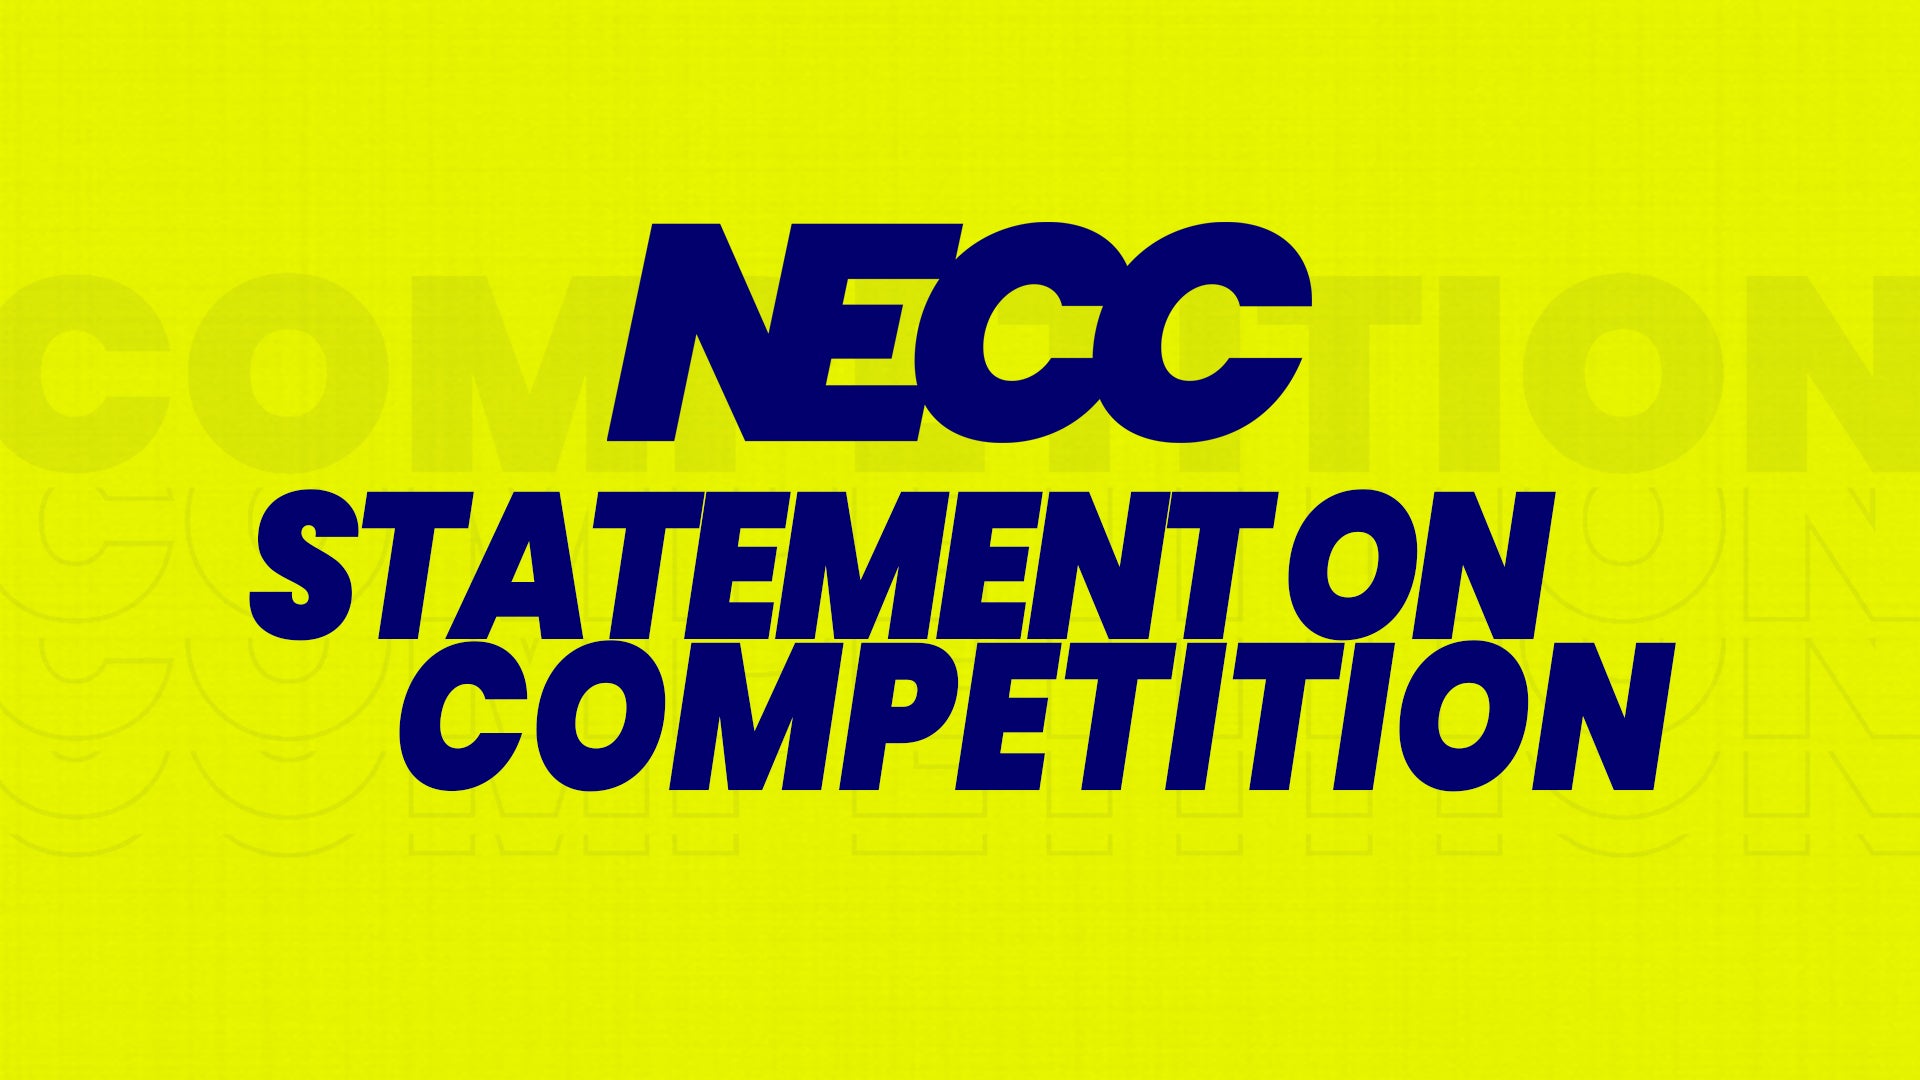 NECC Releases Statement on Competition as 2021-22 Academic Year Gets Underway